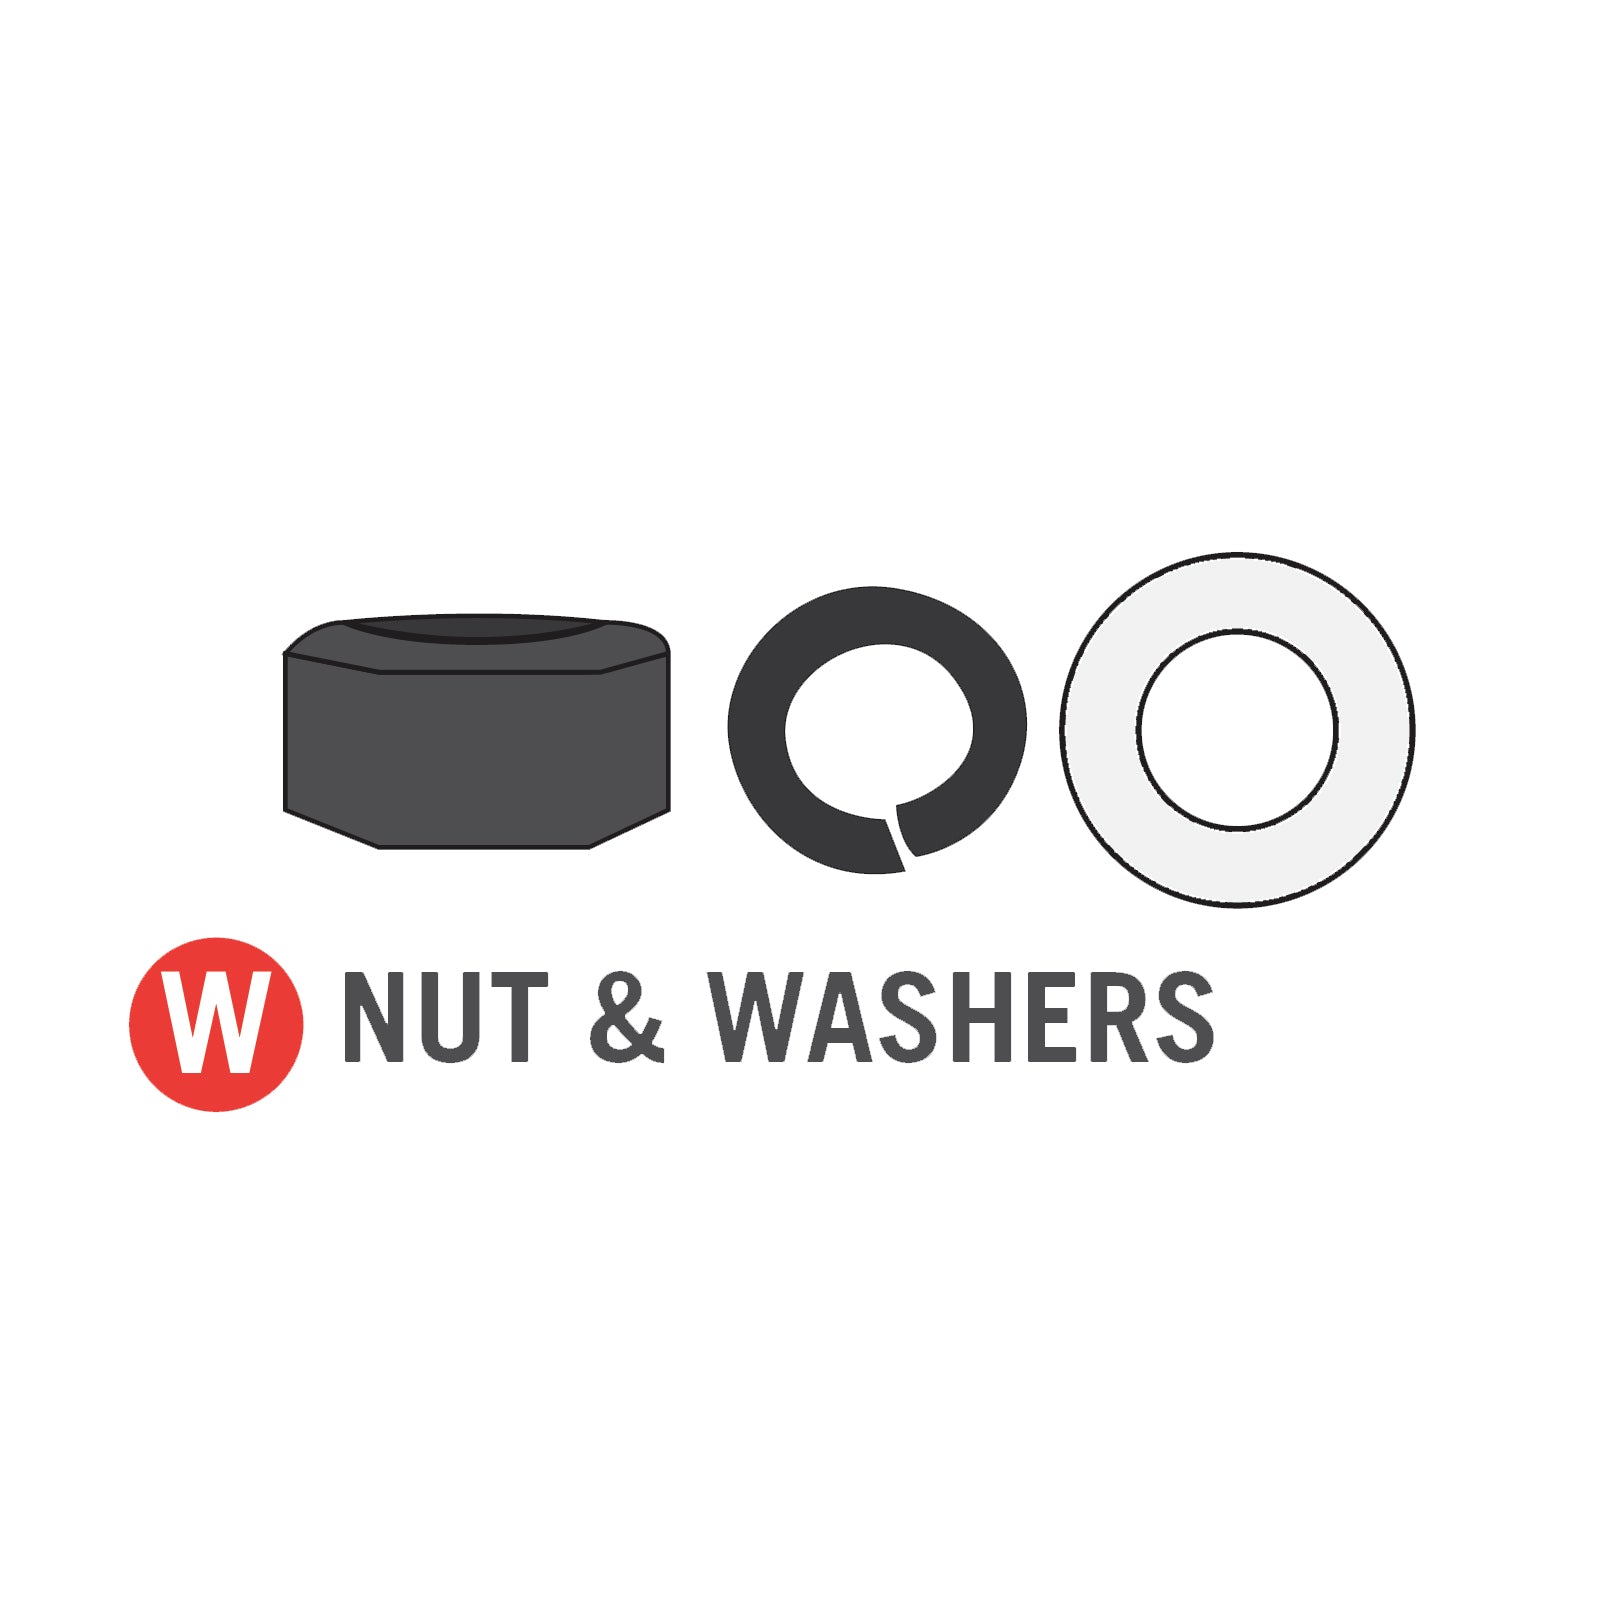 Nut & Washers for 11x18 foot Horizon Trampoline (Part W).